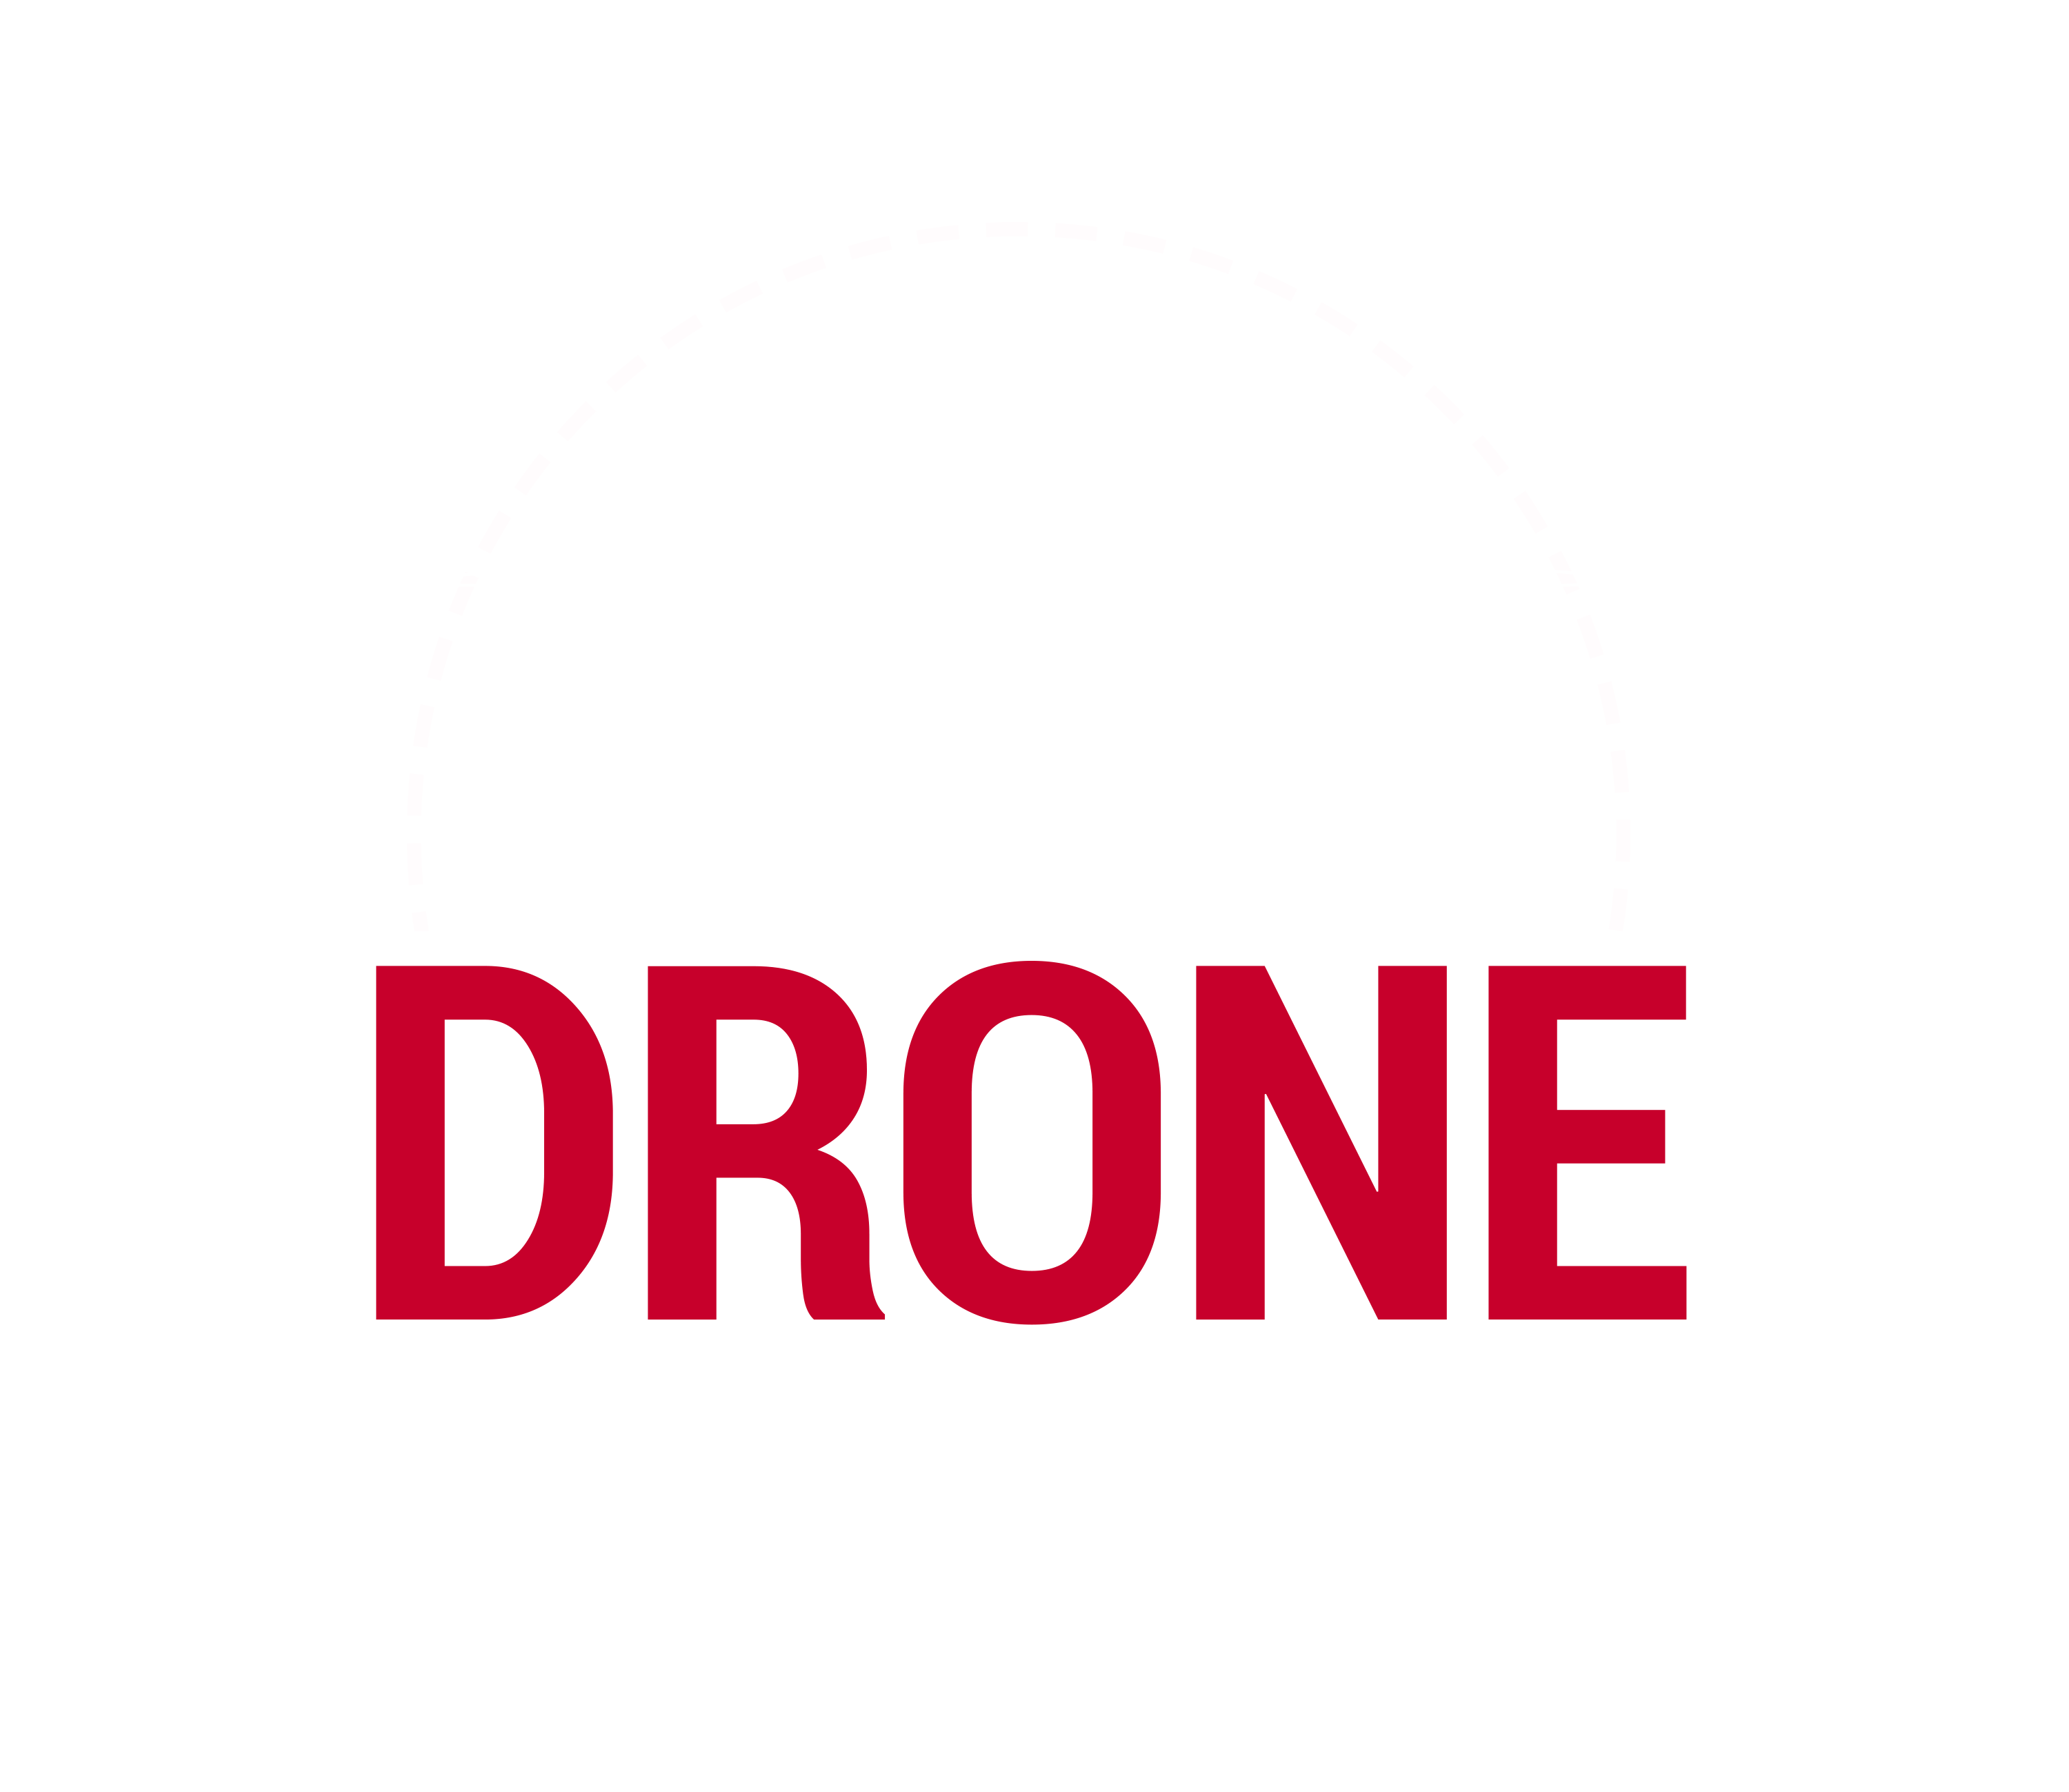 Drone video pyrenees